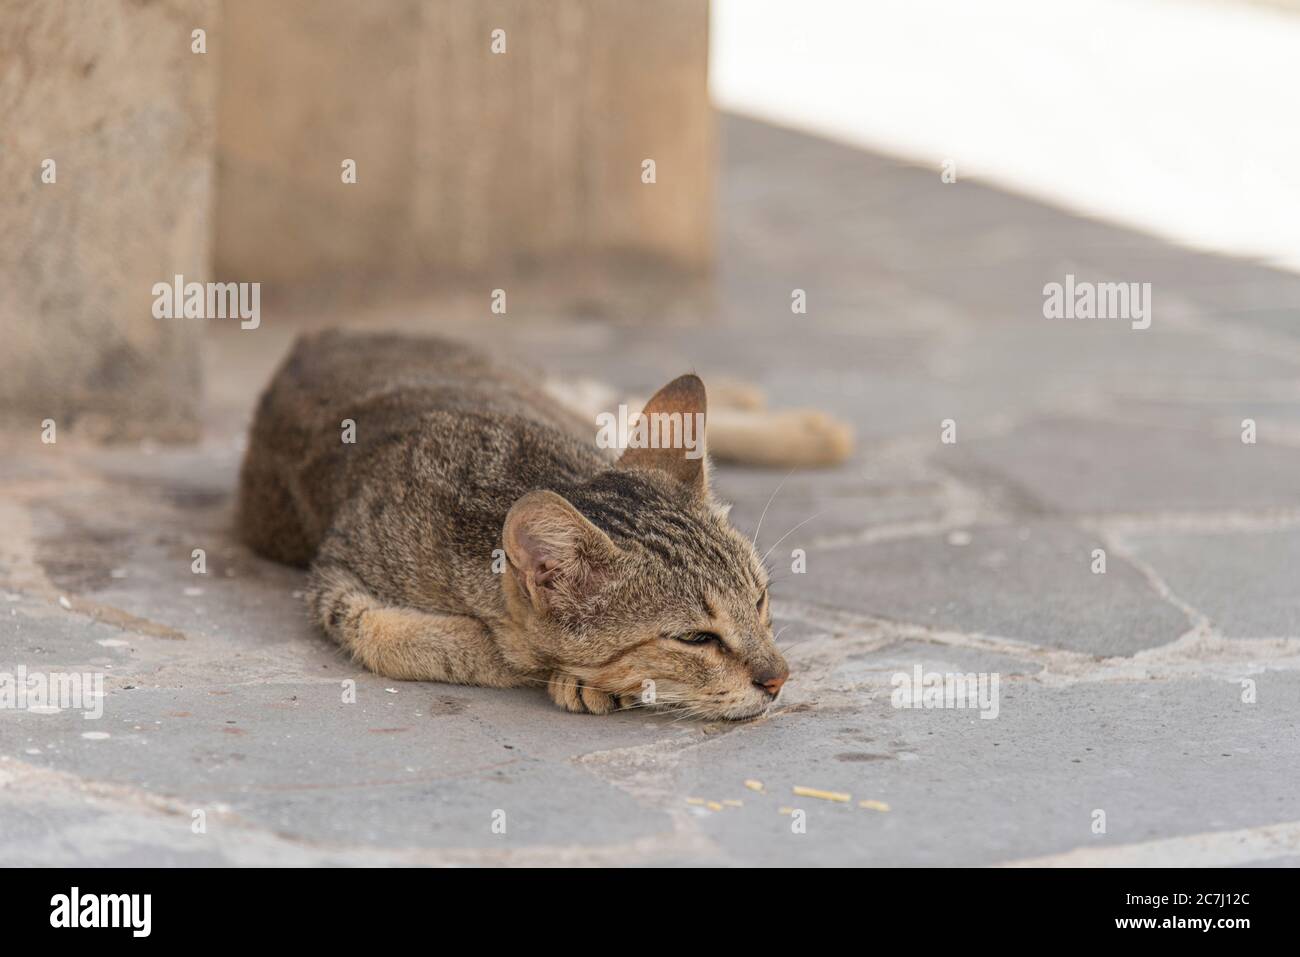 Sicily - Sunny impressions of the Aeolian Islands, also known as Aeolian Islands or Isole Eolie: Lipari, Stromboli, Salina, Vulcano, Panarea, Filicudi and Alicudi. Cat is lounging in the shade on Alicudi Island. Stock Photo